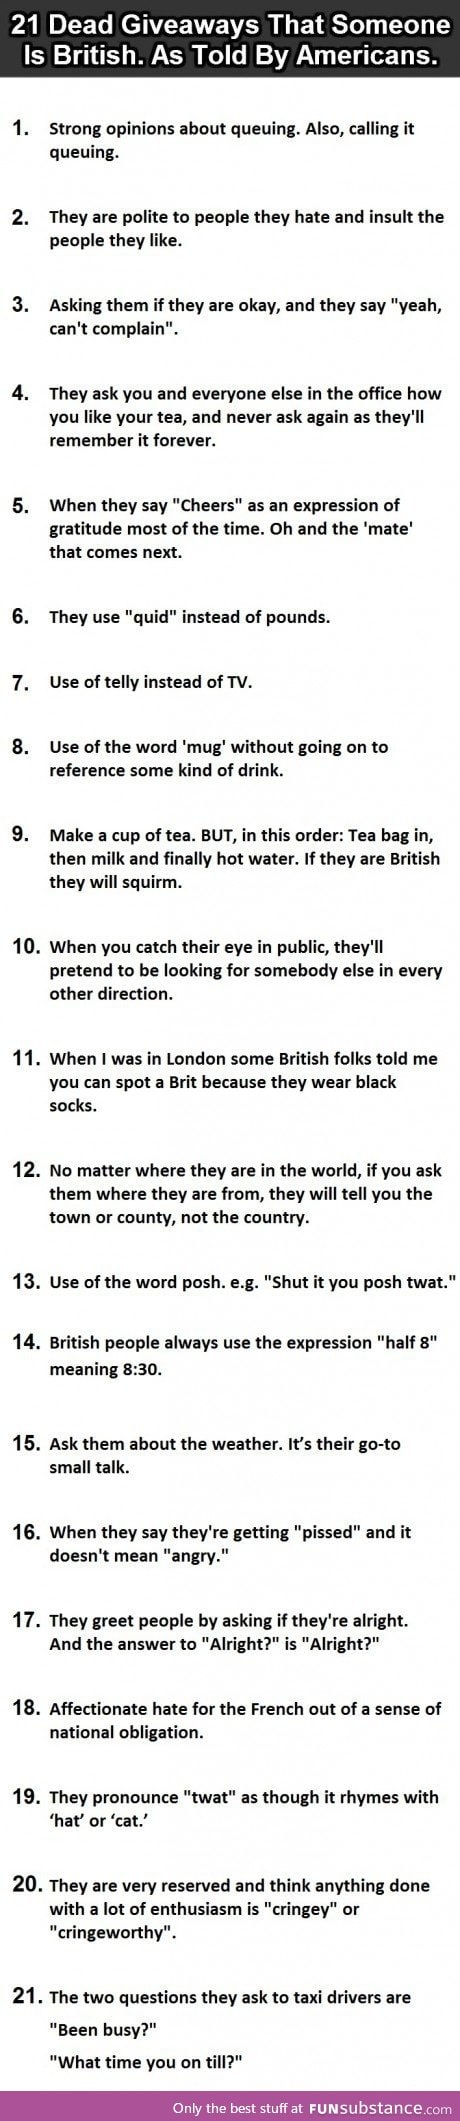 How to identify a British